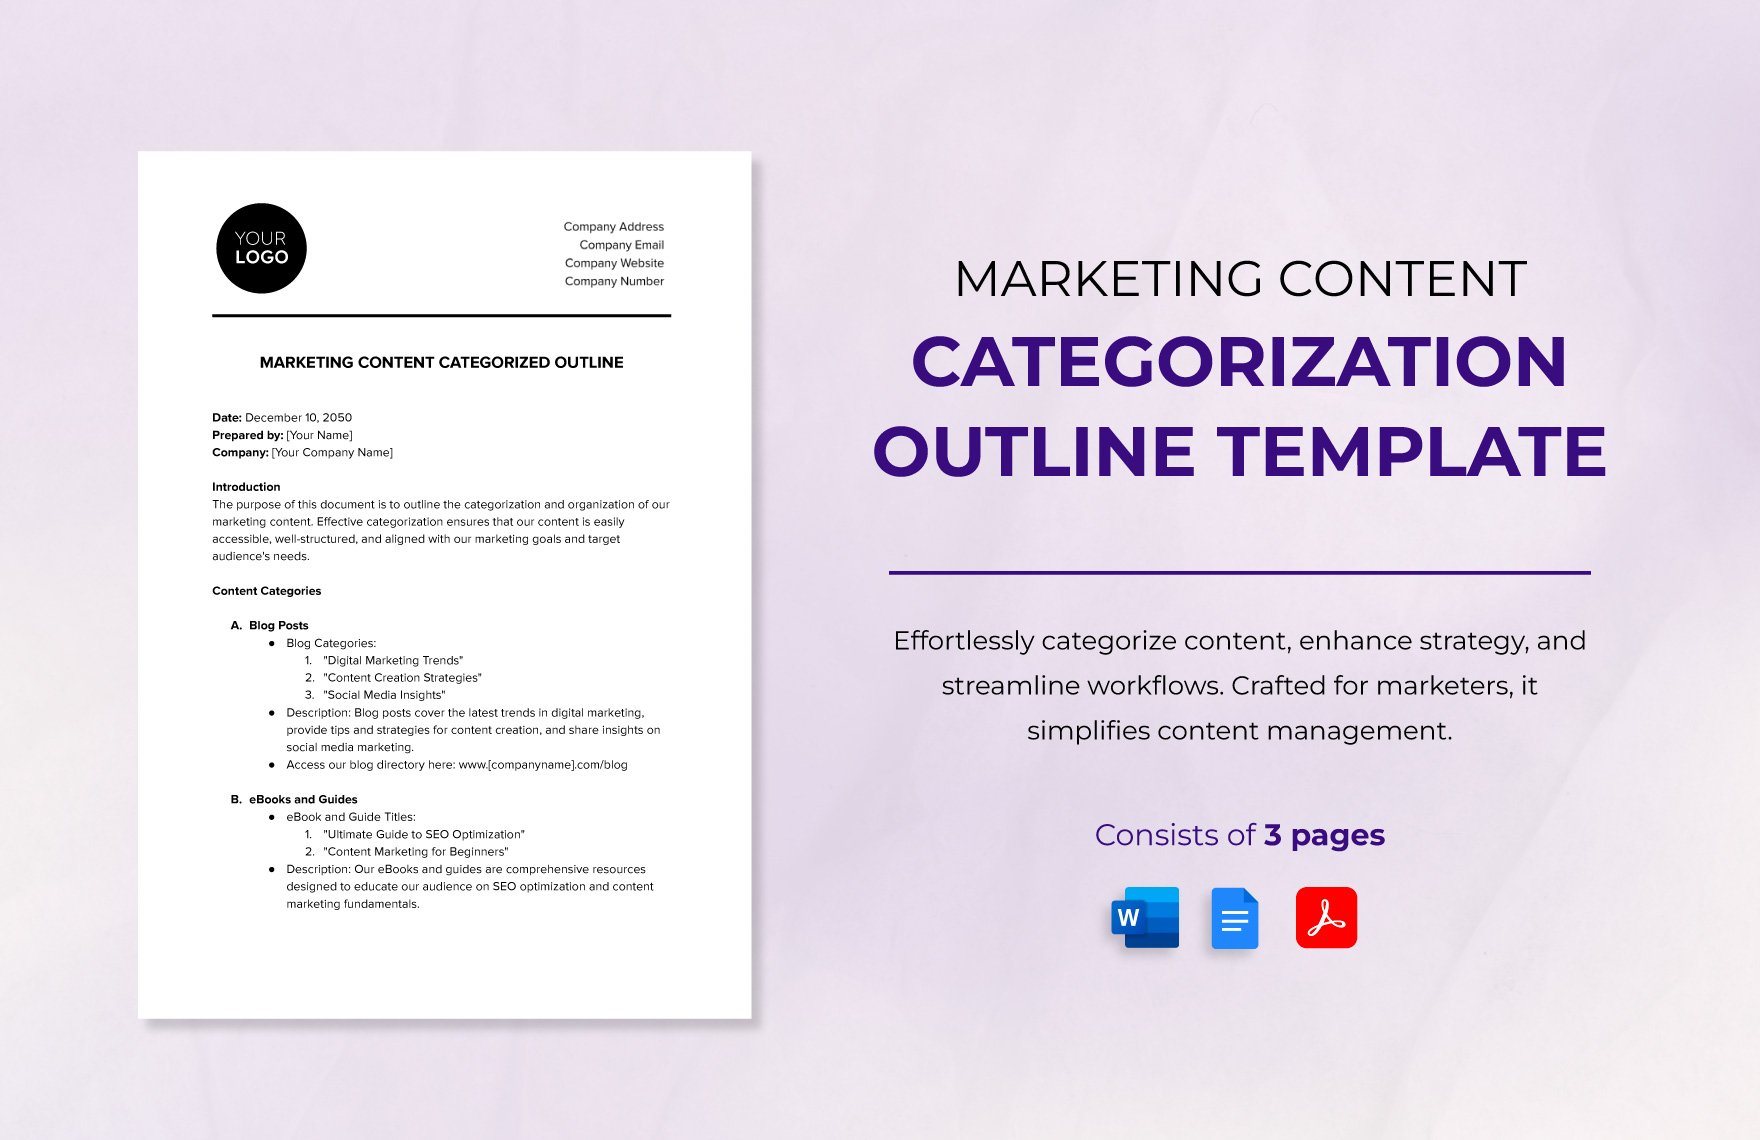 Marketing Content Categorization Outline Template in Word, Google Docs, PDF